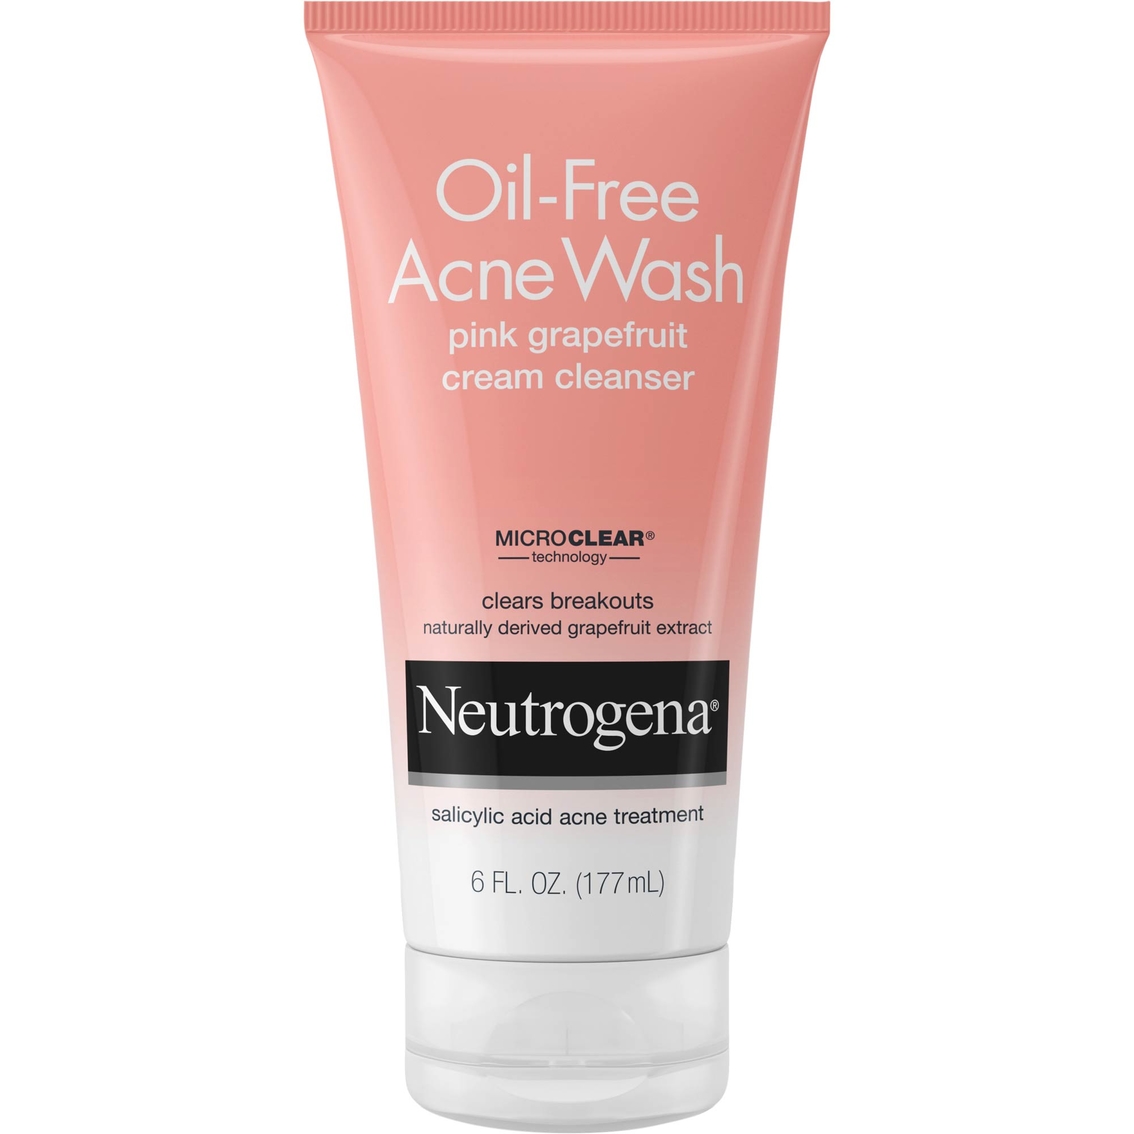 Neutrogena Oil Free Acne Wash Pink Grapefruit Cream Cleanser 6 Oz Acne Treatments Holiday Gift Guide Shop The Exchange